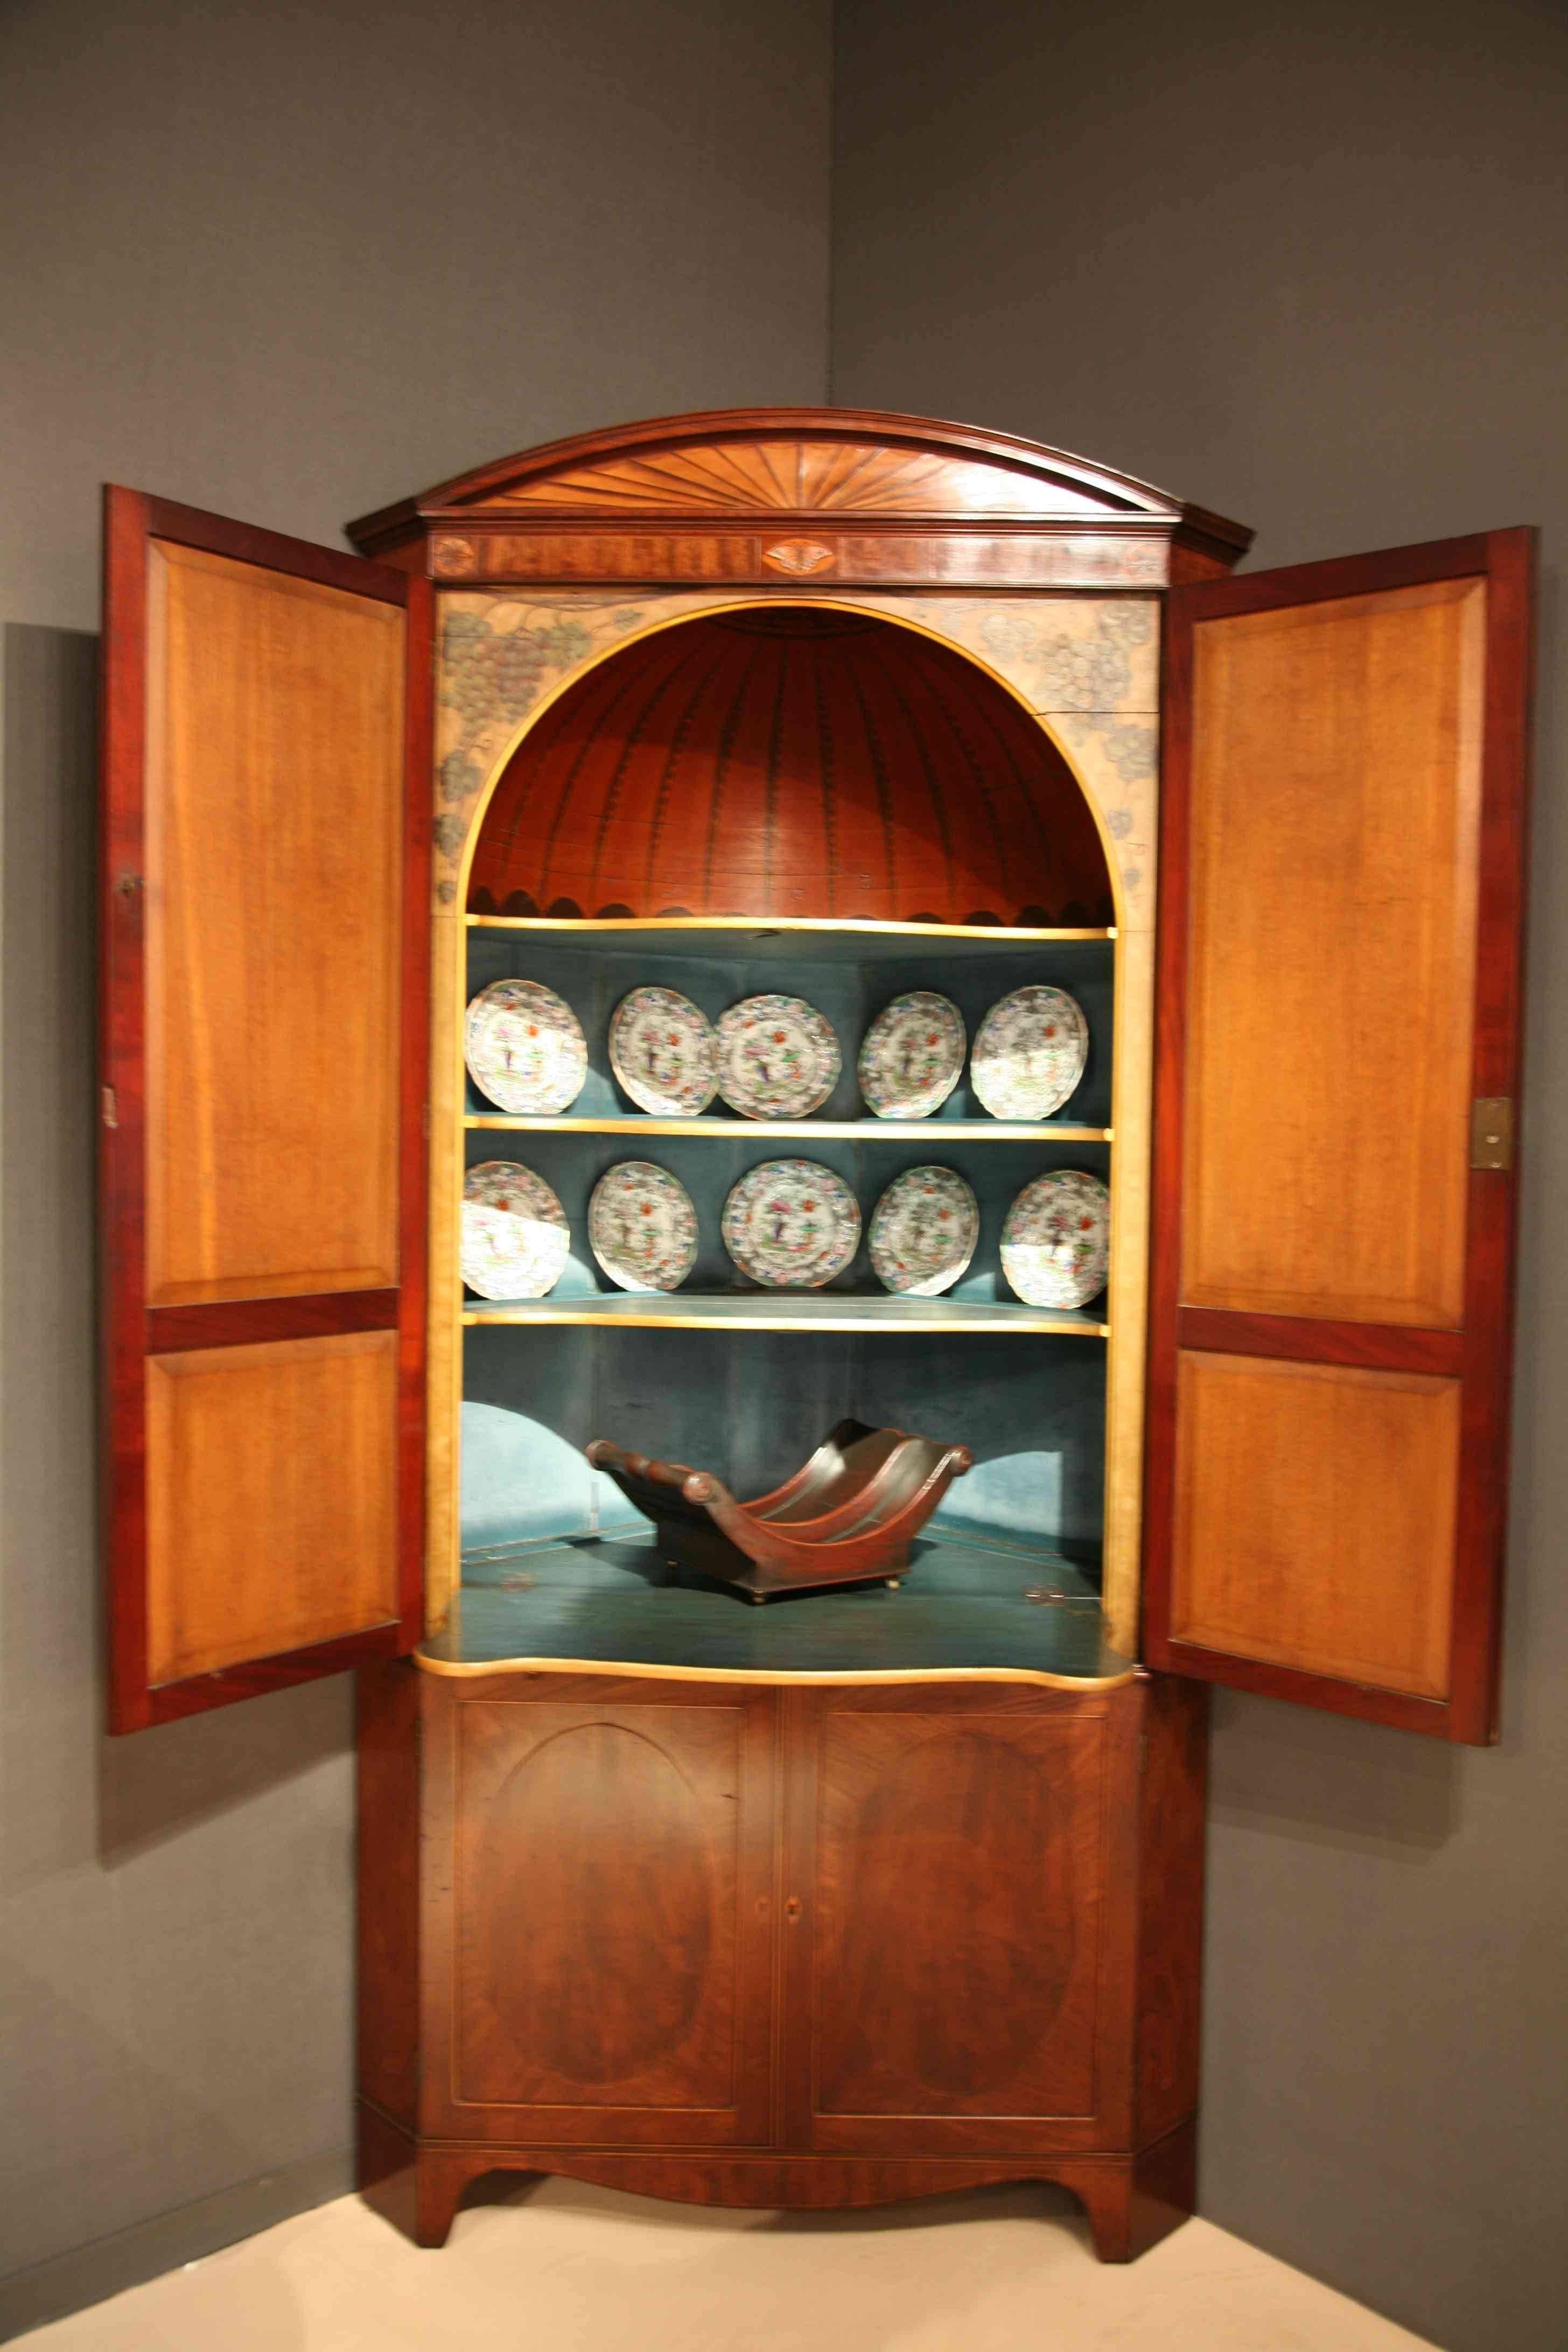 A George III Sheraton mahogany double corner cupboard, profusely inlaid, crossbanded and strung with a decorated umbrella interior,
England, circa 1790.